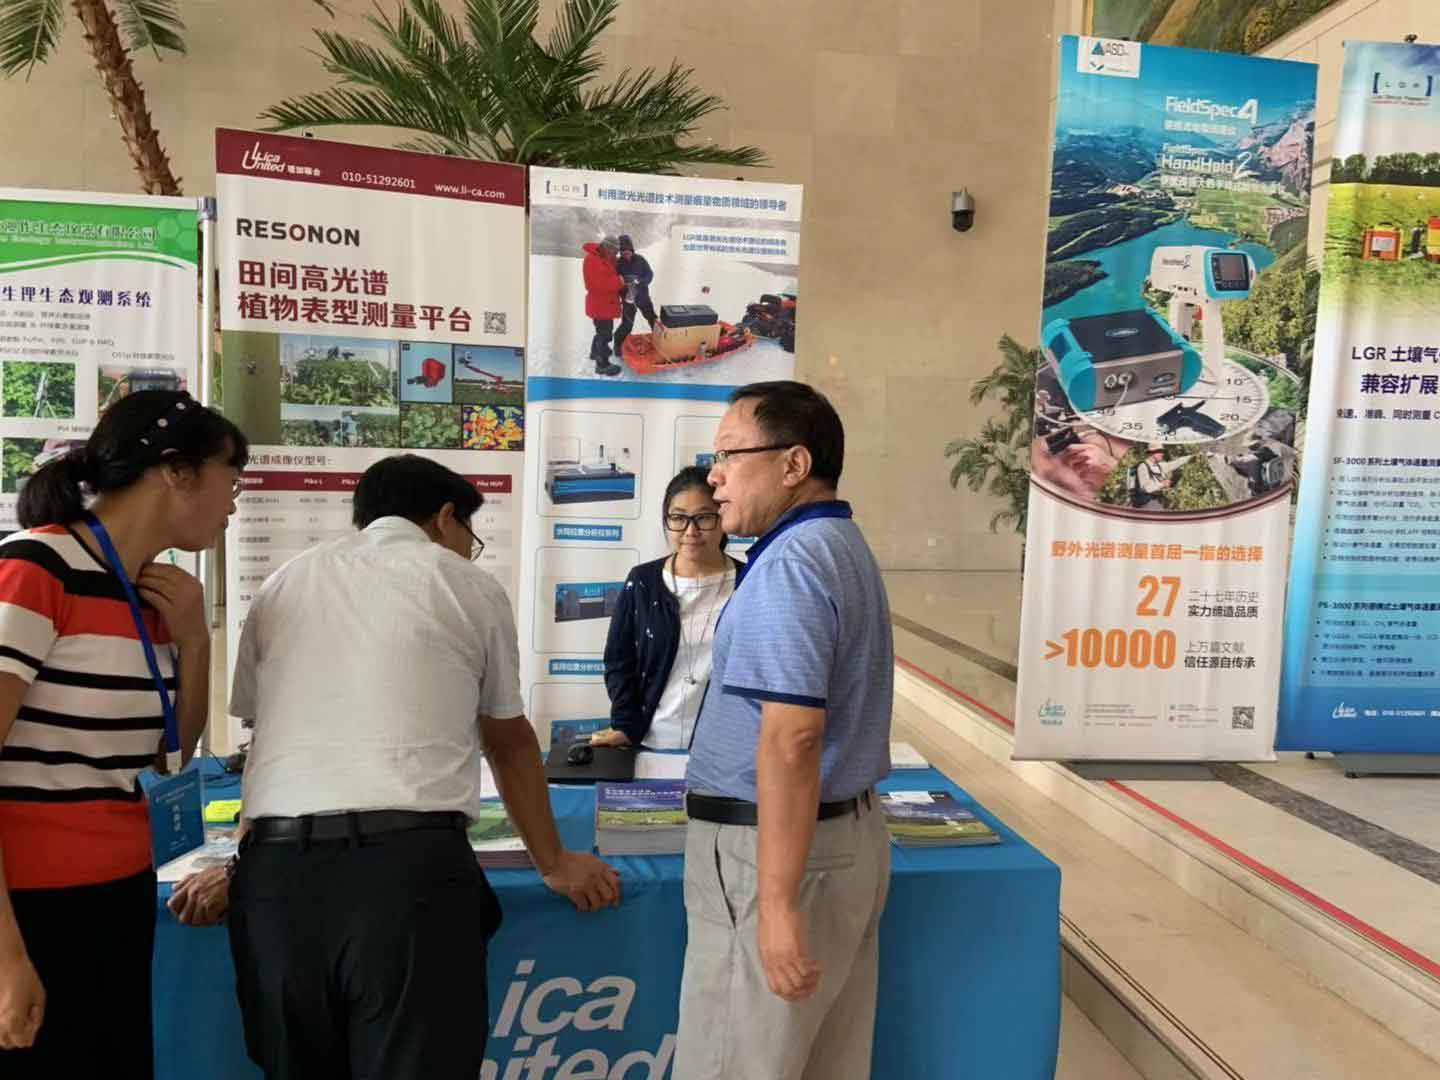 LICA attended the 16th National Corn Cultivation Symposium